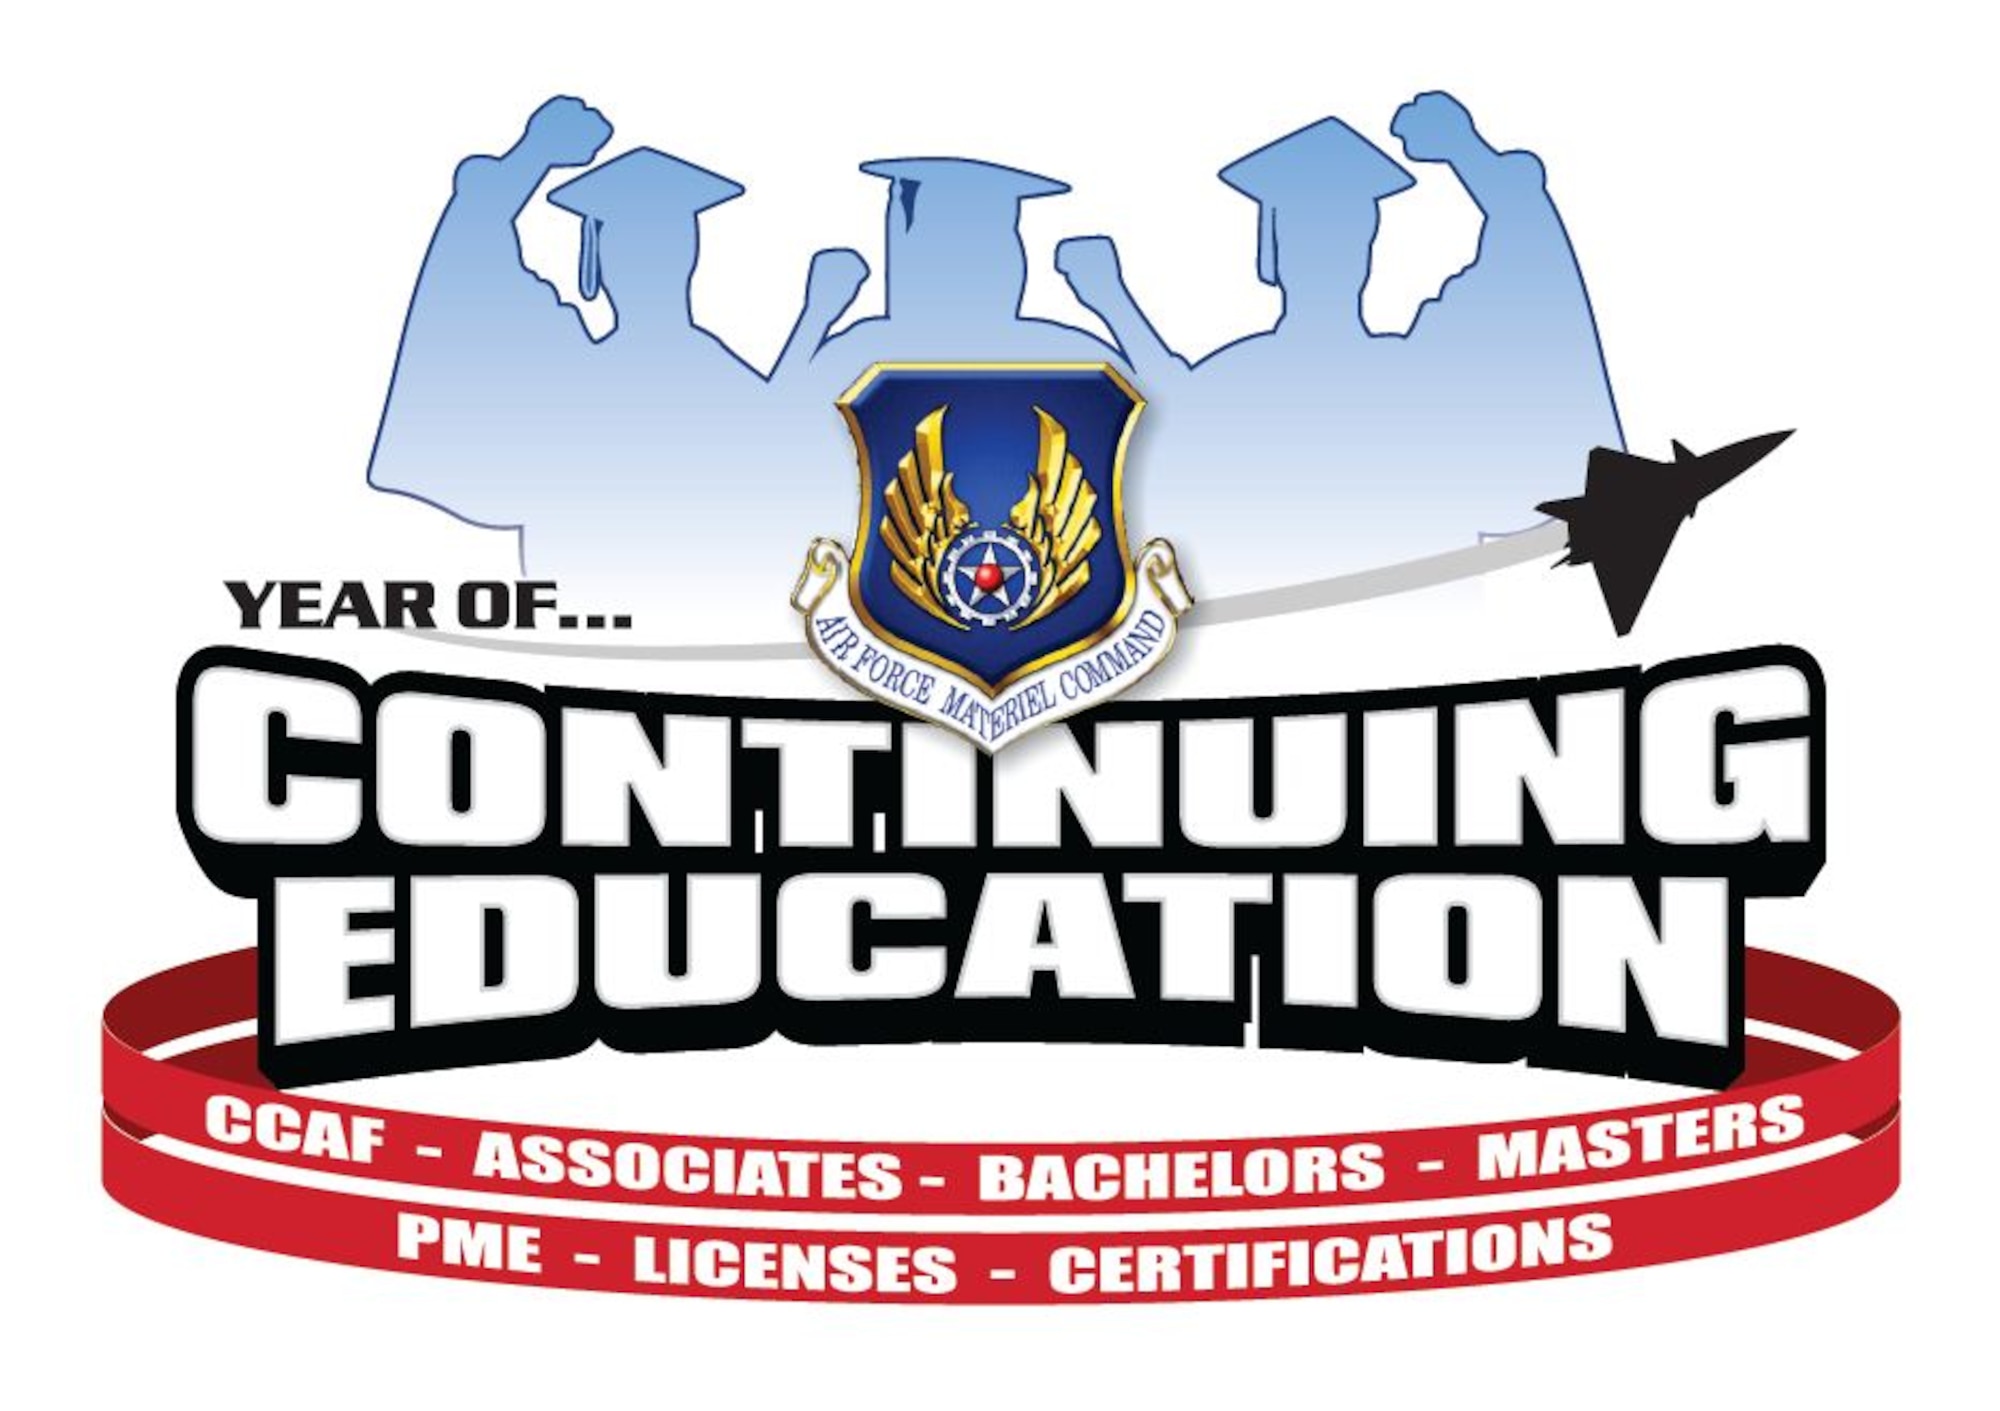 2012 is AFMC's Year of Continuing Education. (U.S. Air Force graphic)